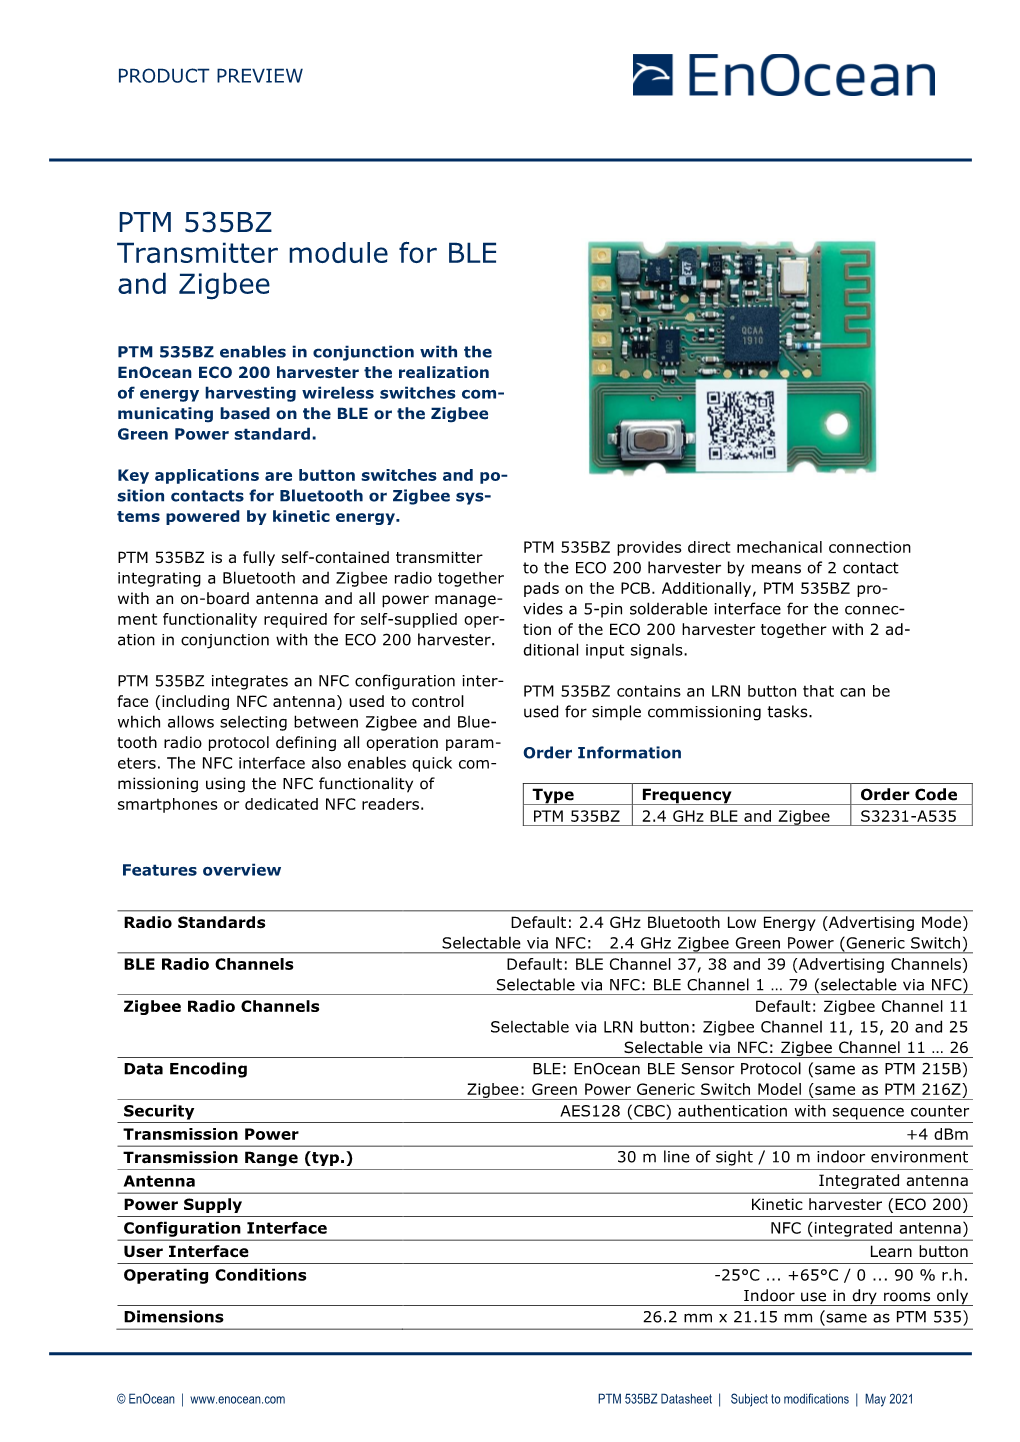 PTM 535BZ Transmitter Module for BLE and Zigbee